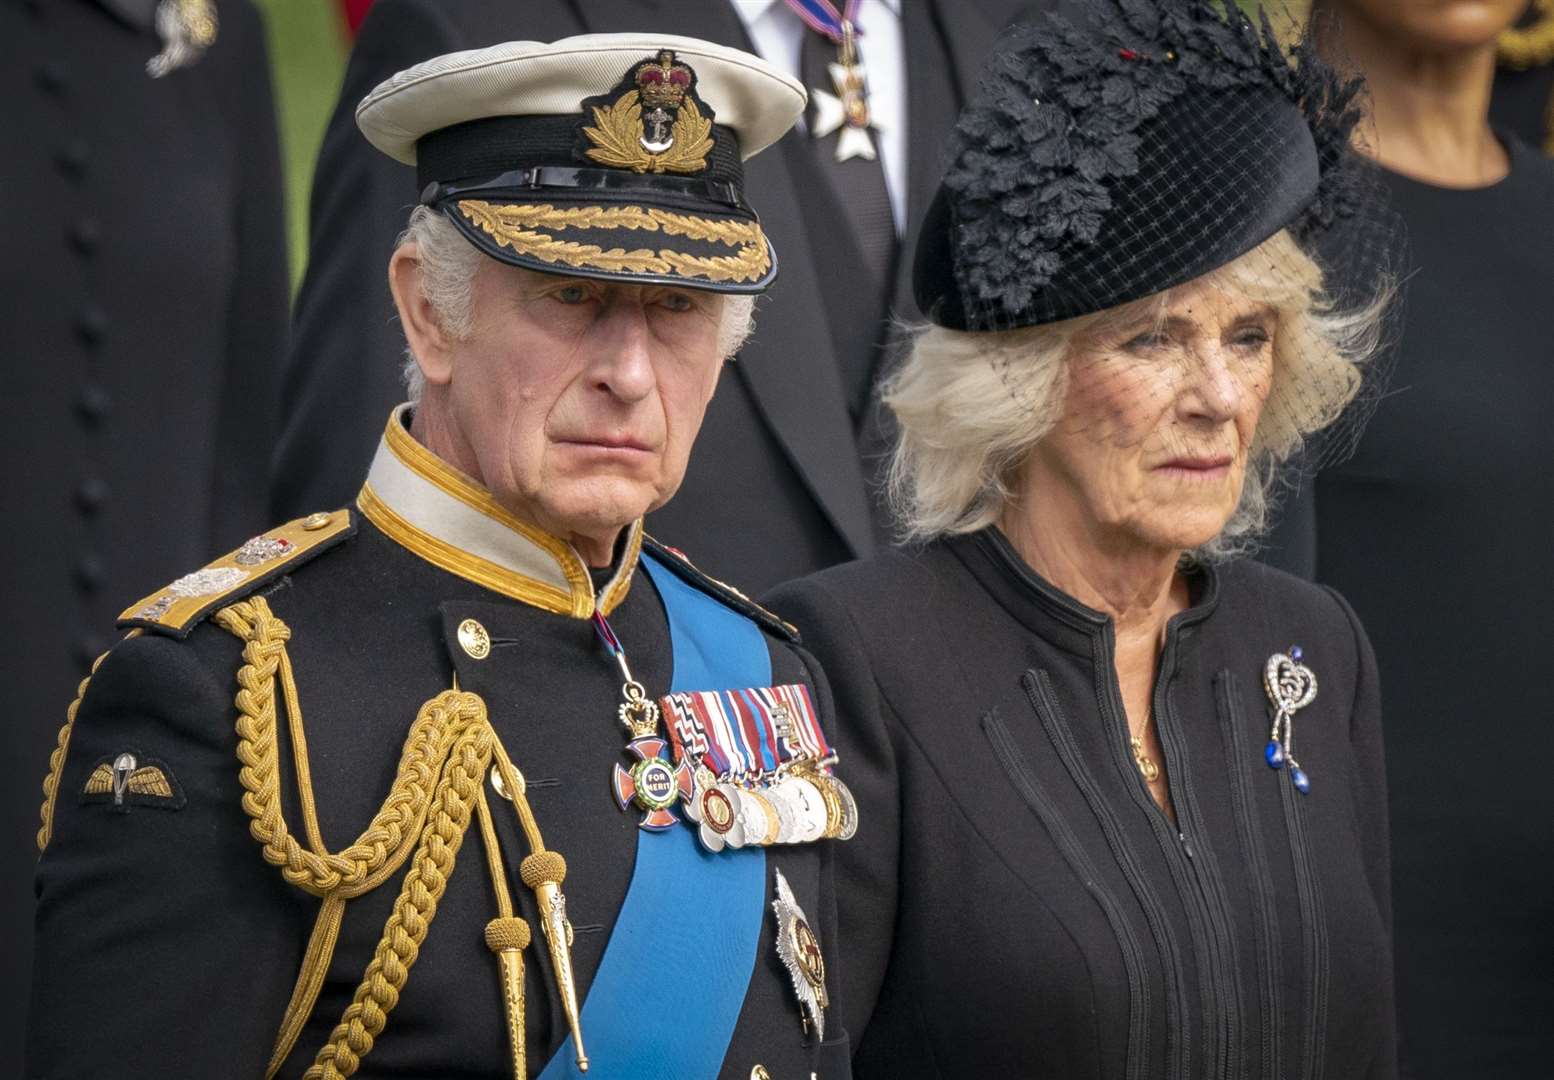 The King and the Queen Consort during the ceremonial procession following the Queen’s state funeral (Jane Barlow/PA)